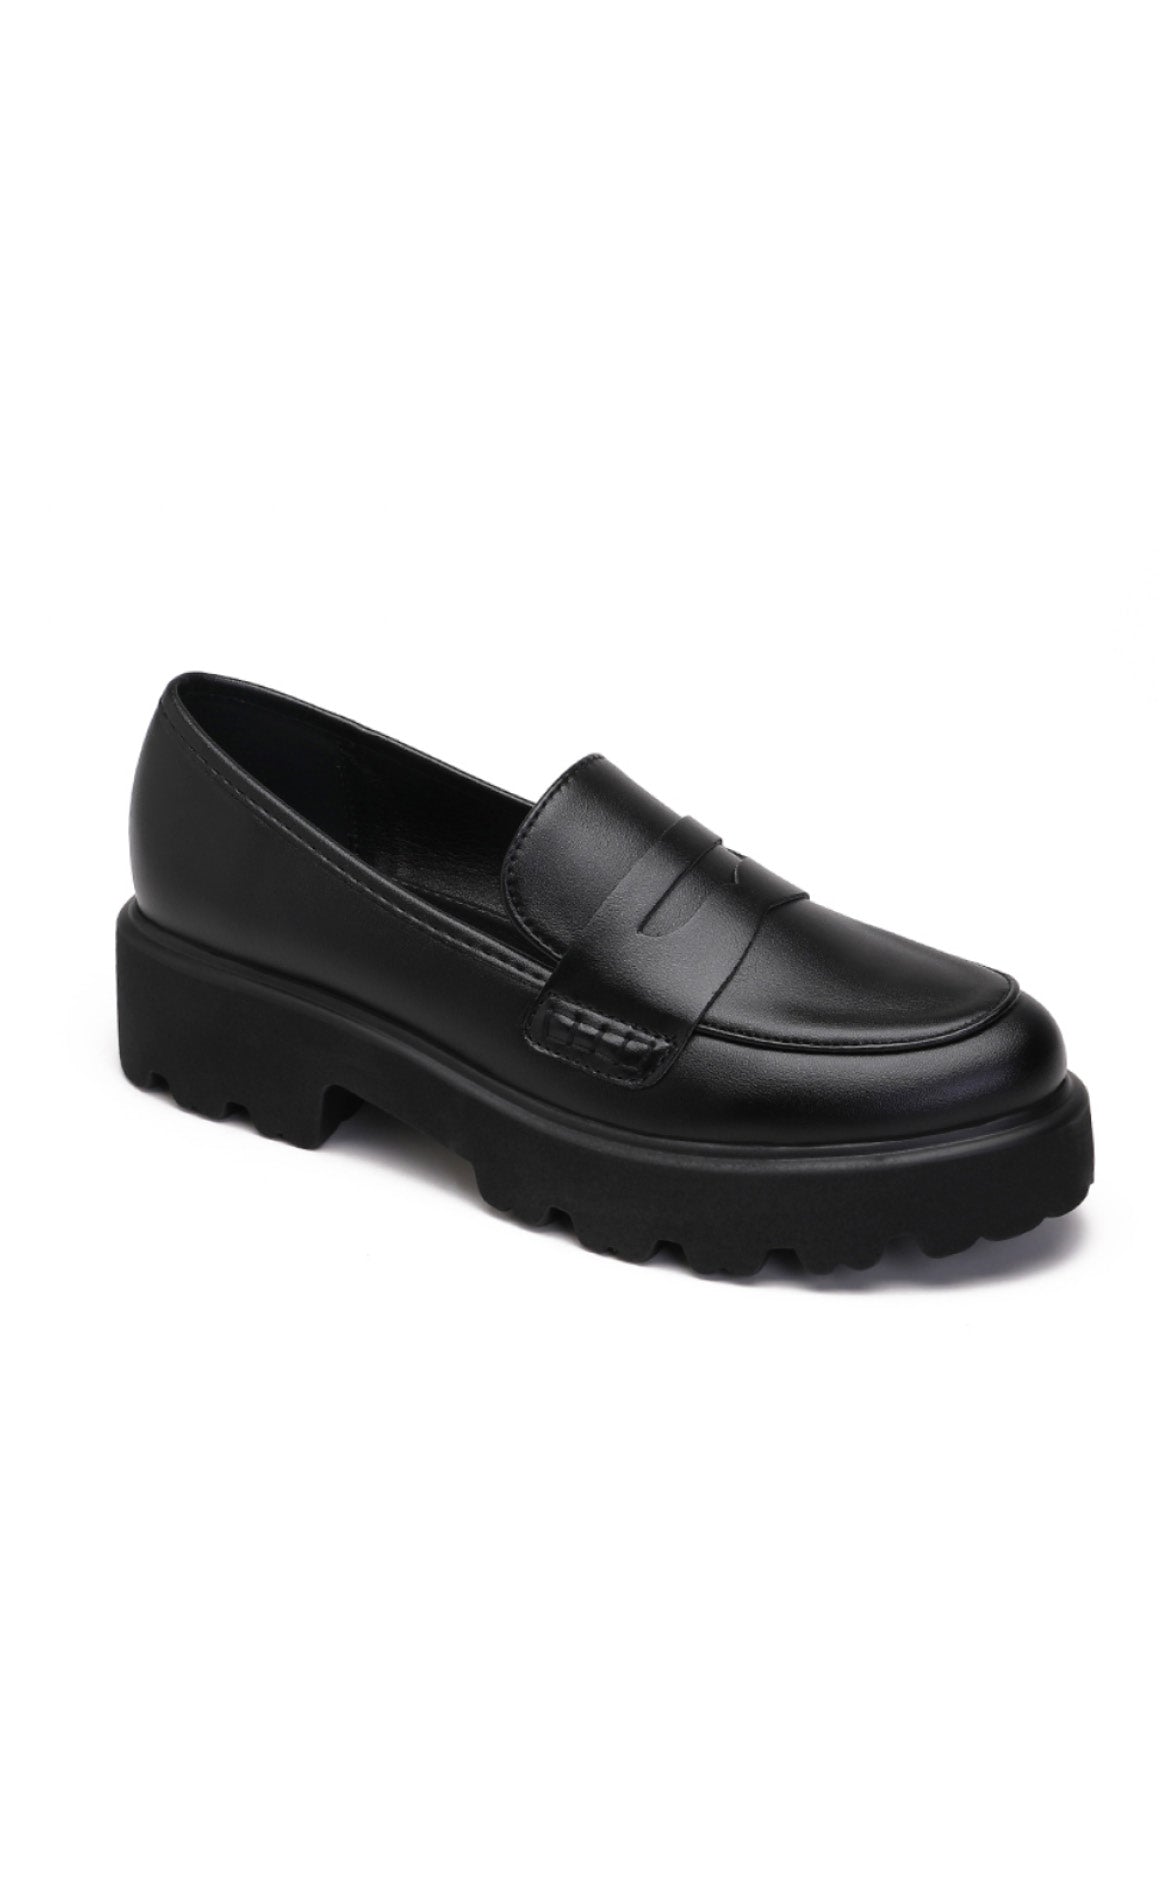 #2 - CHOSEN Loafers - Mary - Black